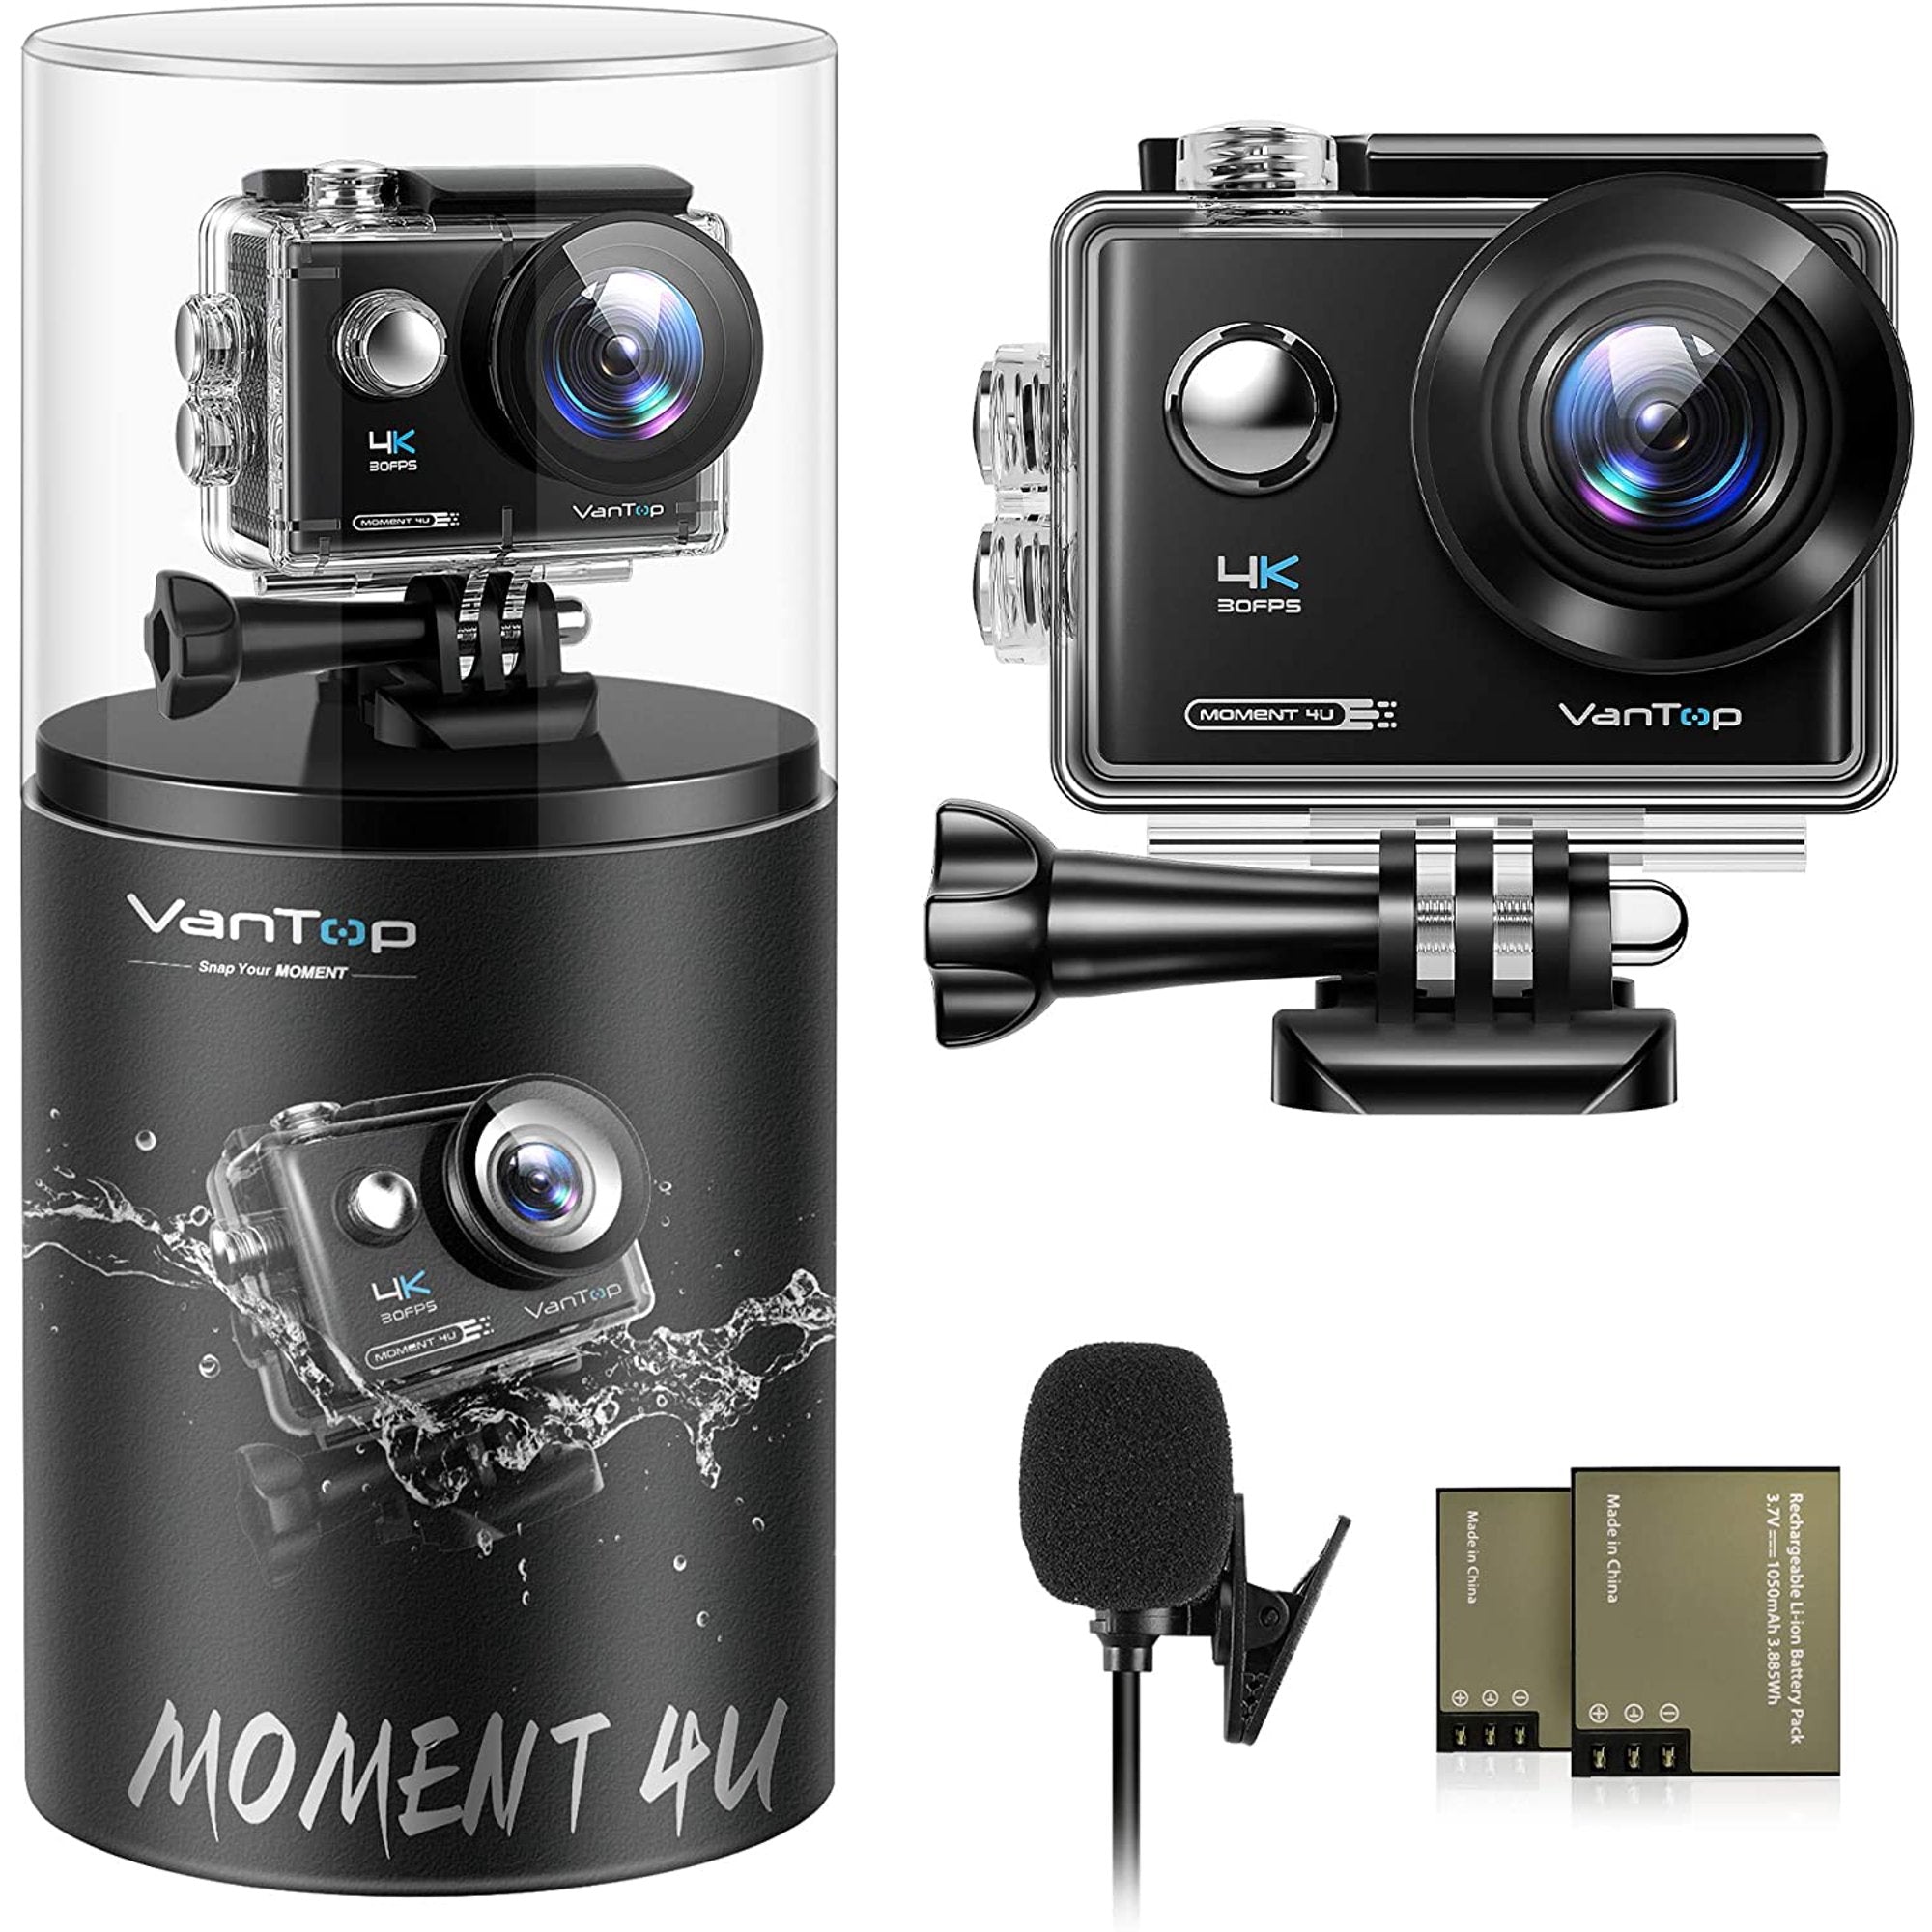 VanTop MM4U Moment 4U 4K Action Camera 20MP Waterproof Sports Camera with EIS, External Microphone, Touch Screen, Gopro Compatible Accessories